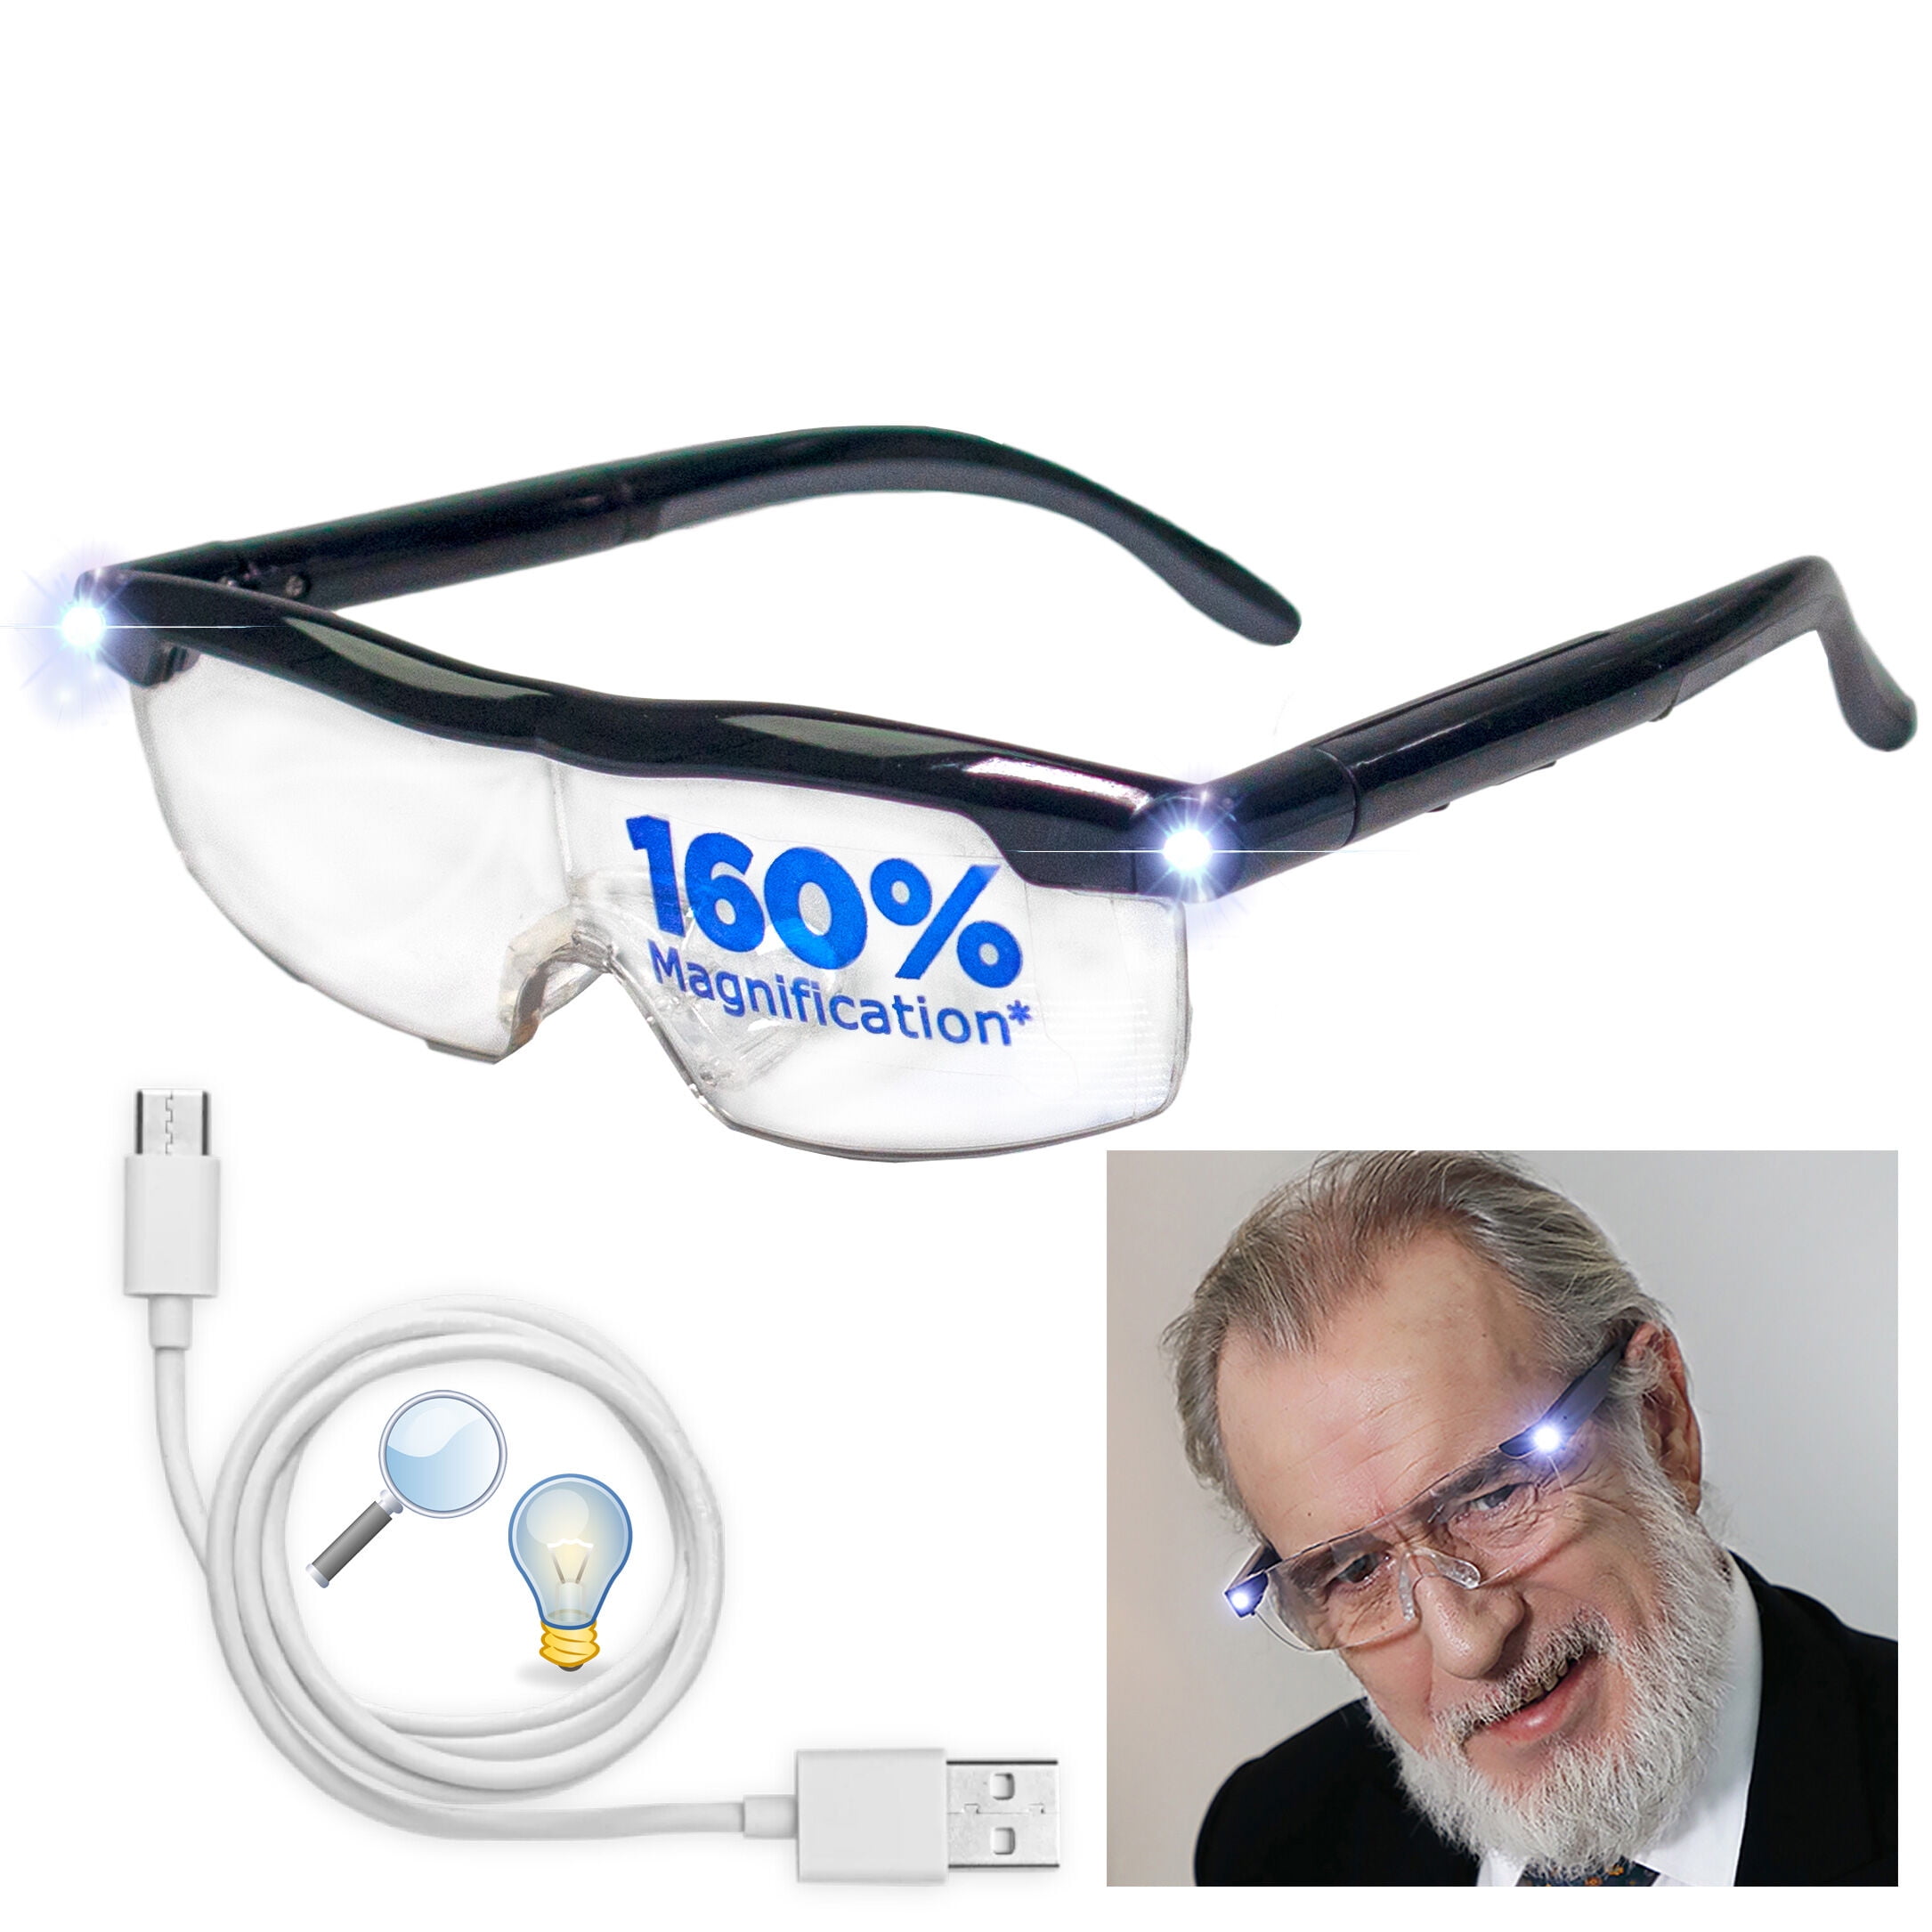 Adult Magnifying Reading Glasses Super Mighty Sight Glasses With Led